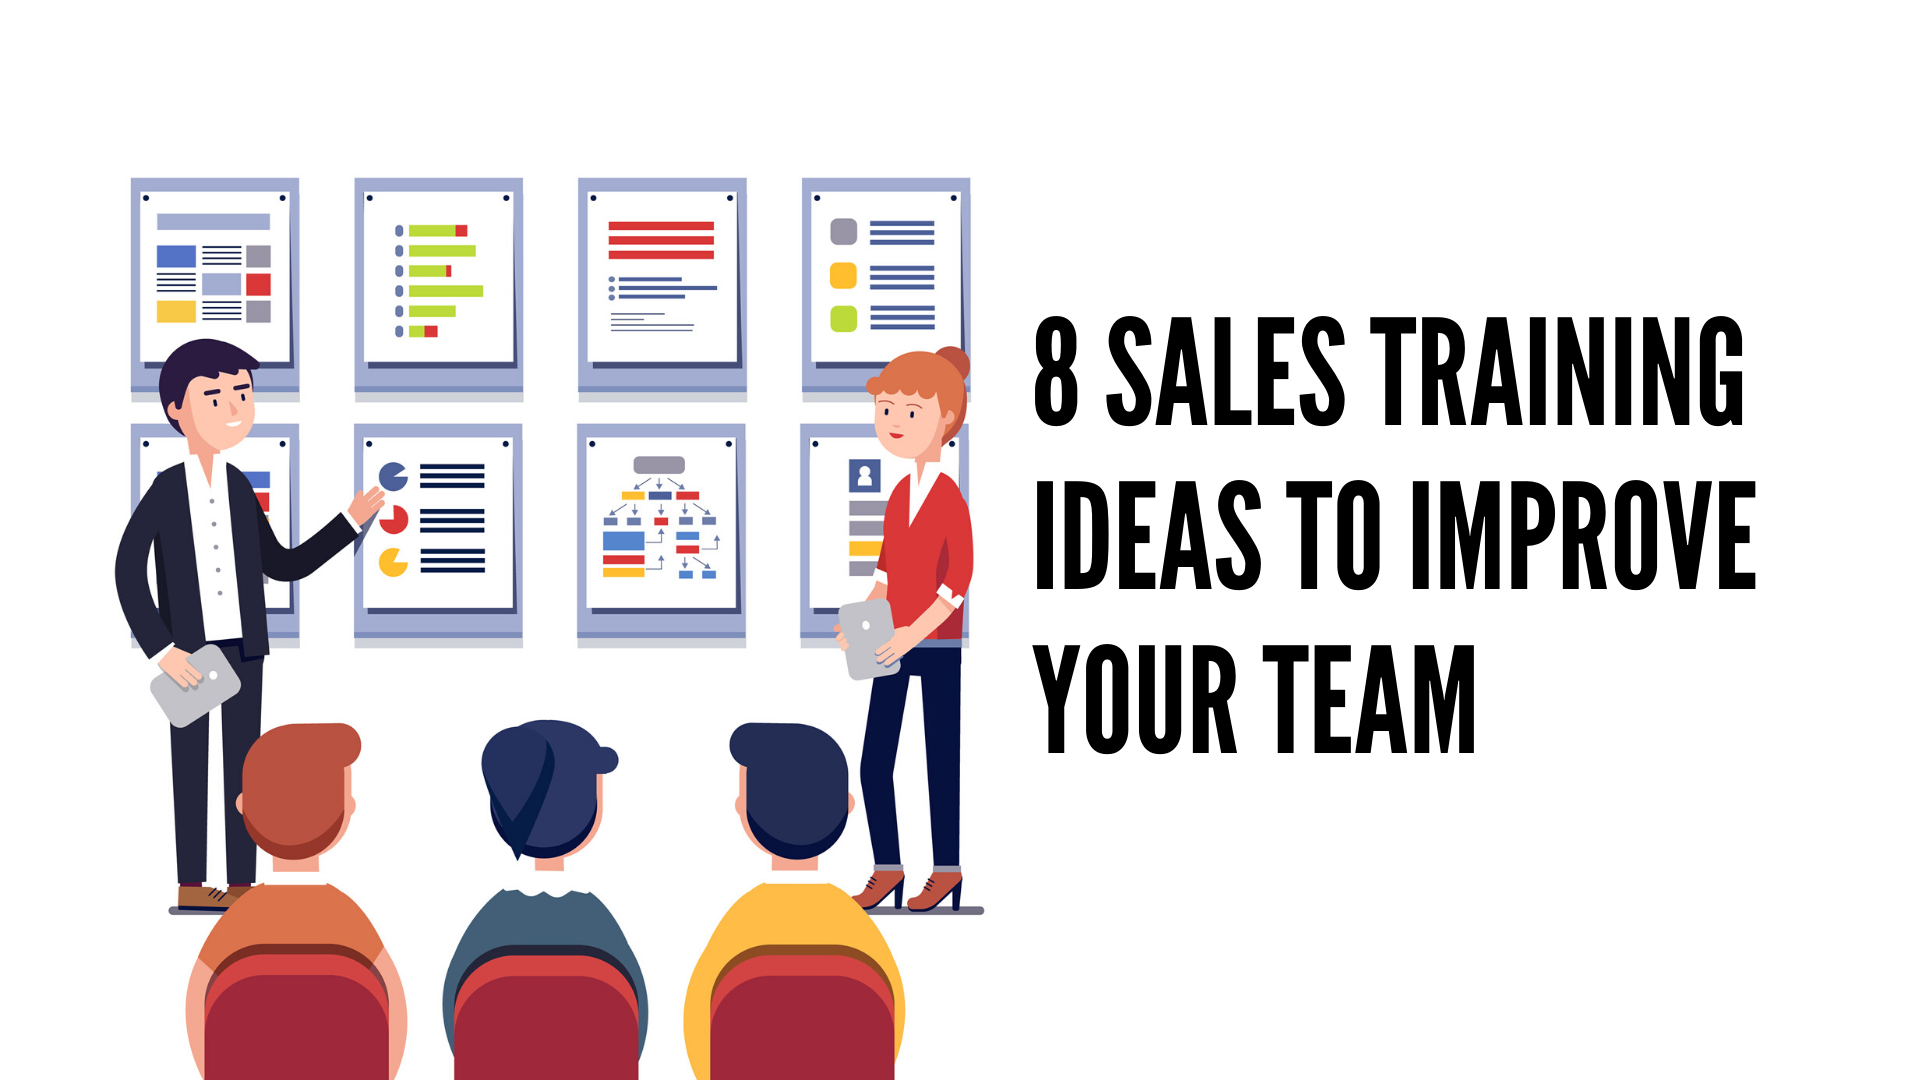 8 Sales Training Ideas To Keep Your Team in Tip-Top Shape